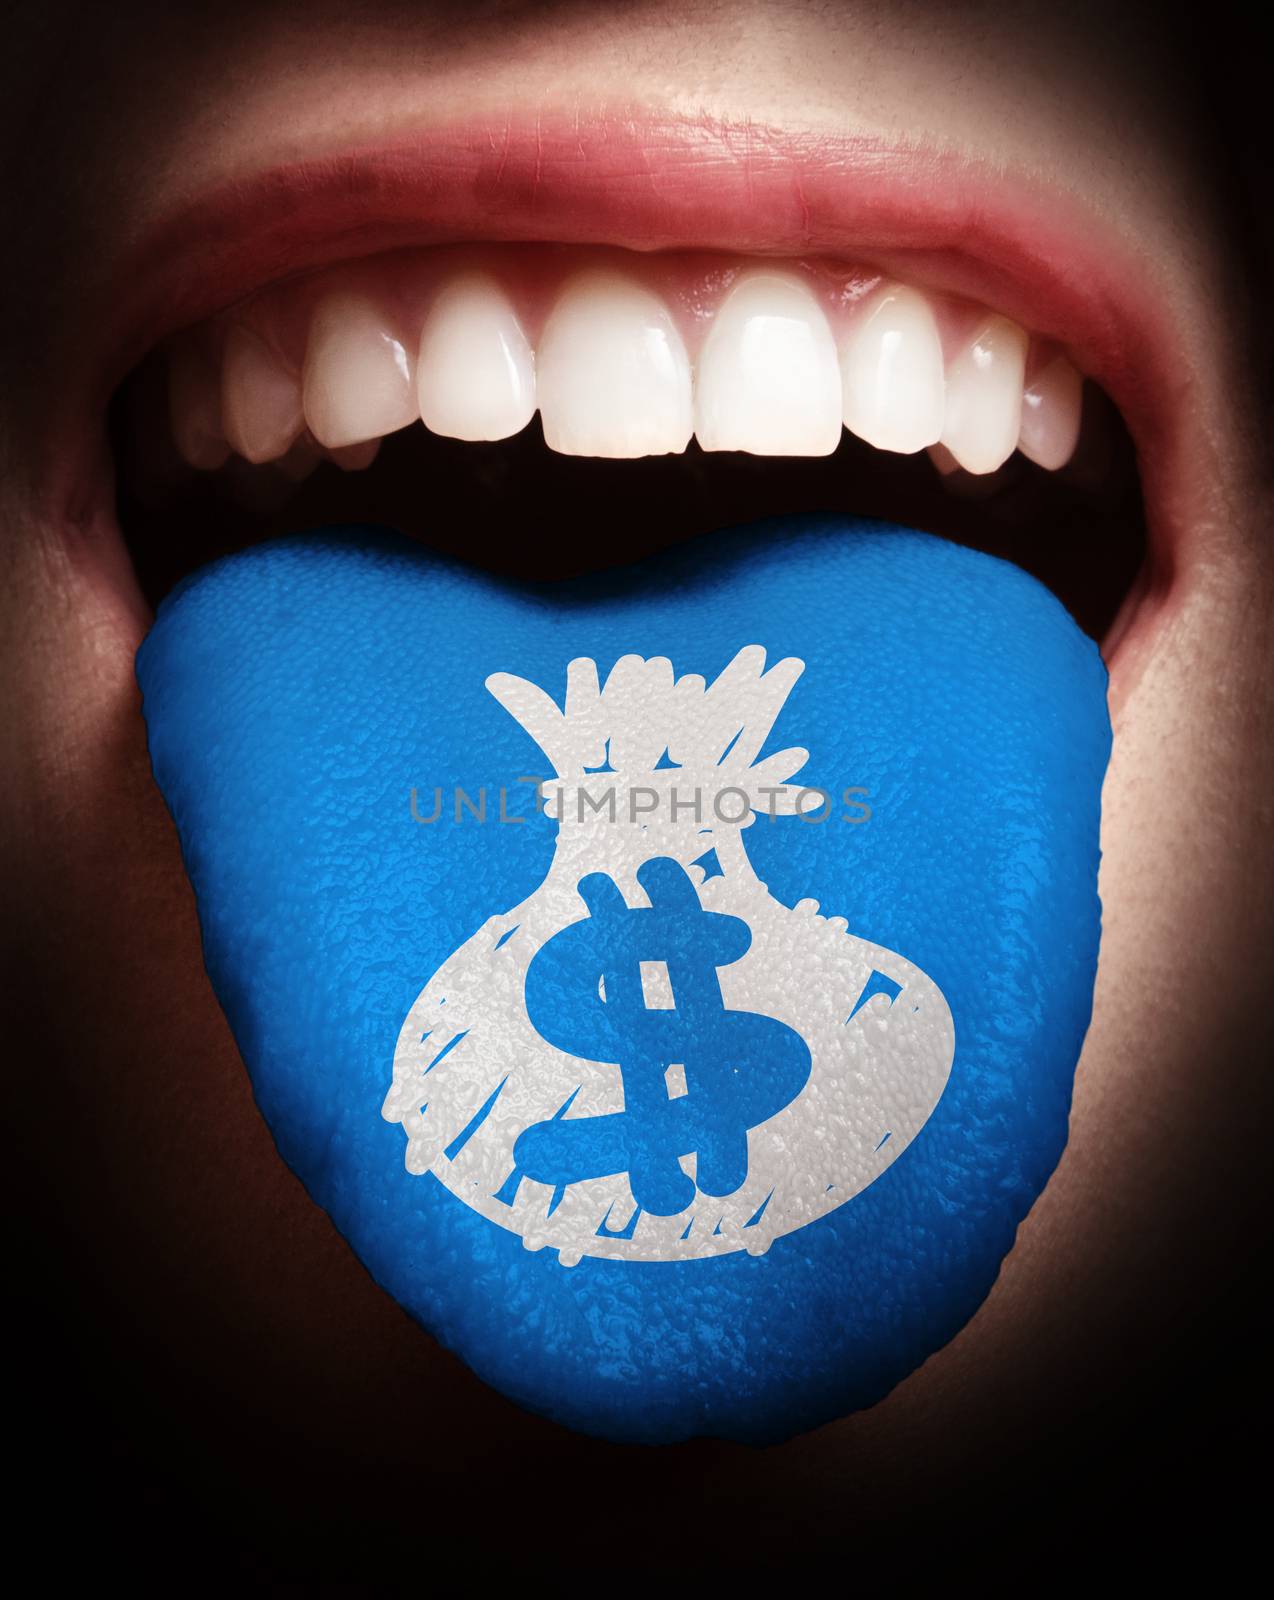 woman with open mouth spreading tongue colored in money bag as c by everythingpossible